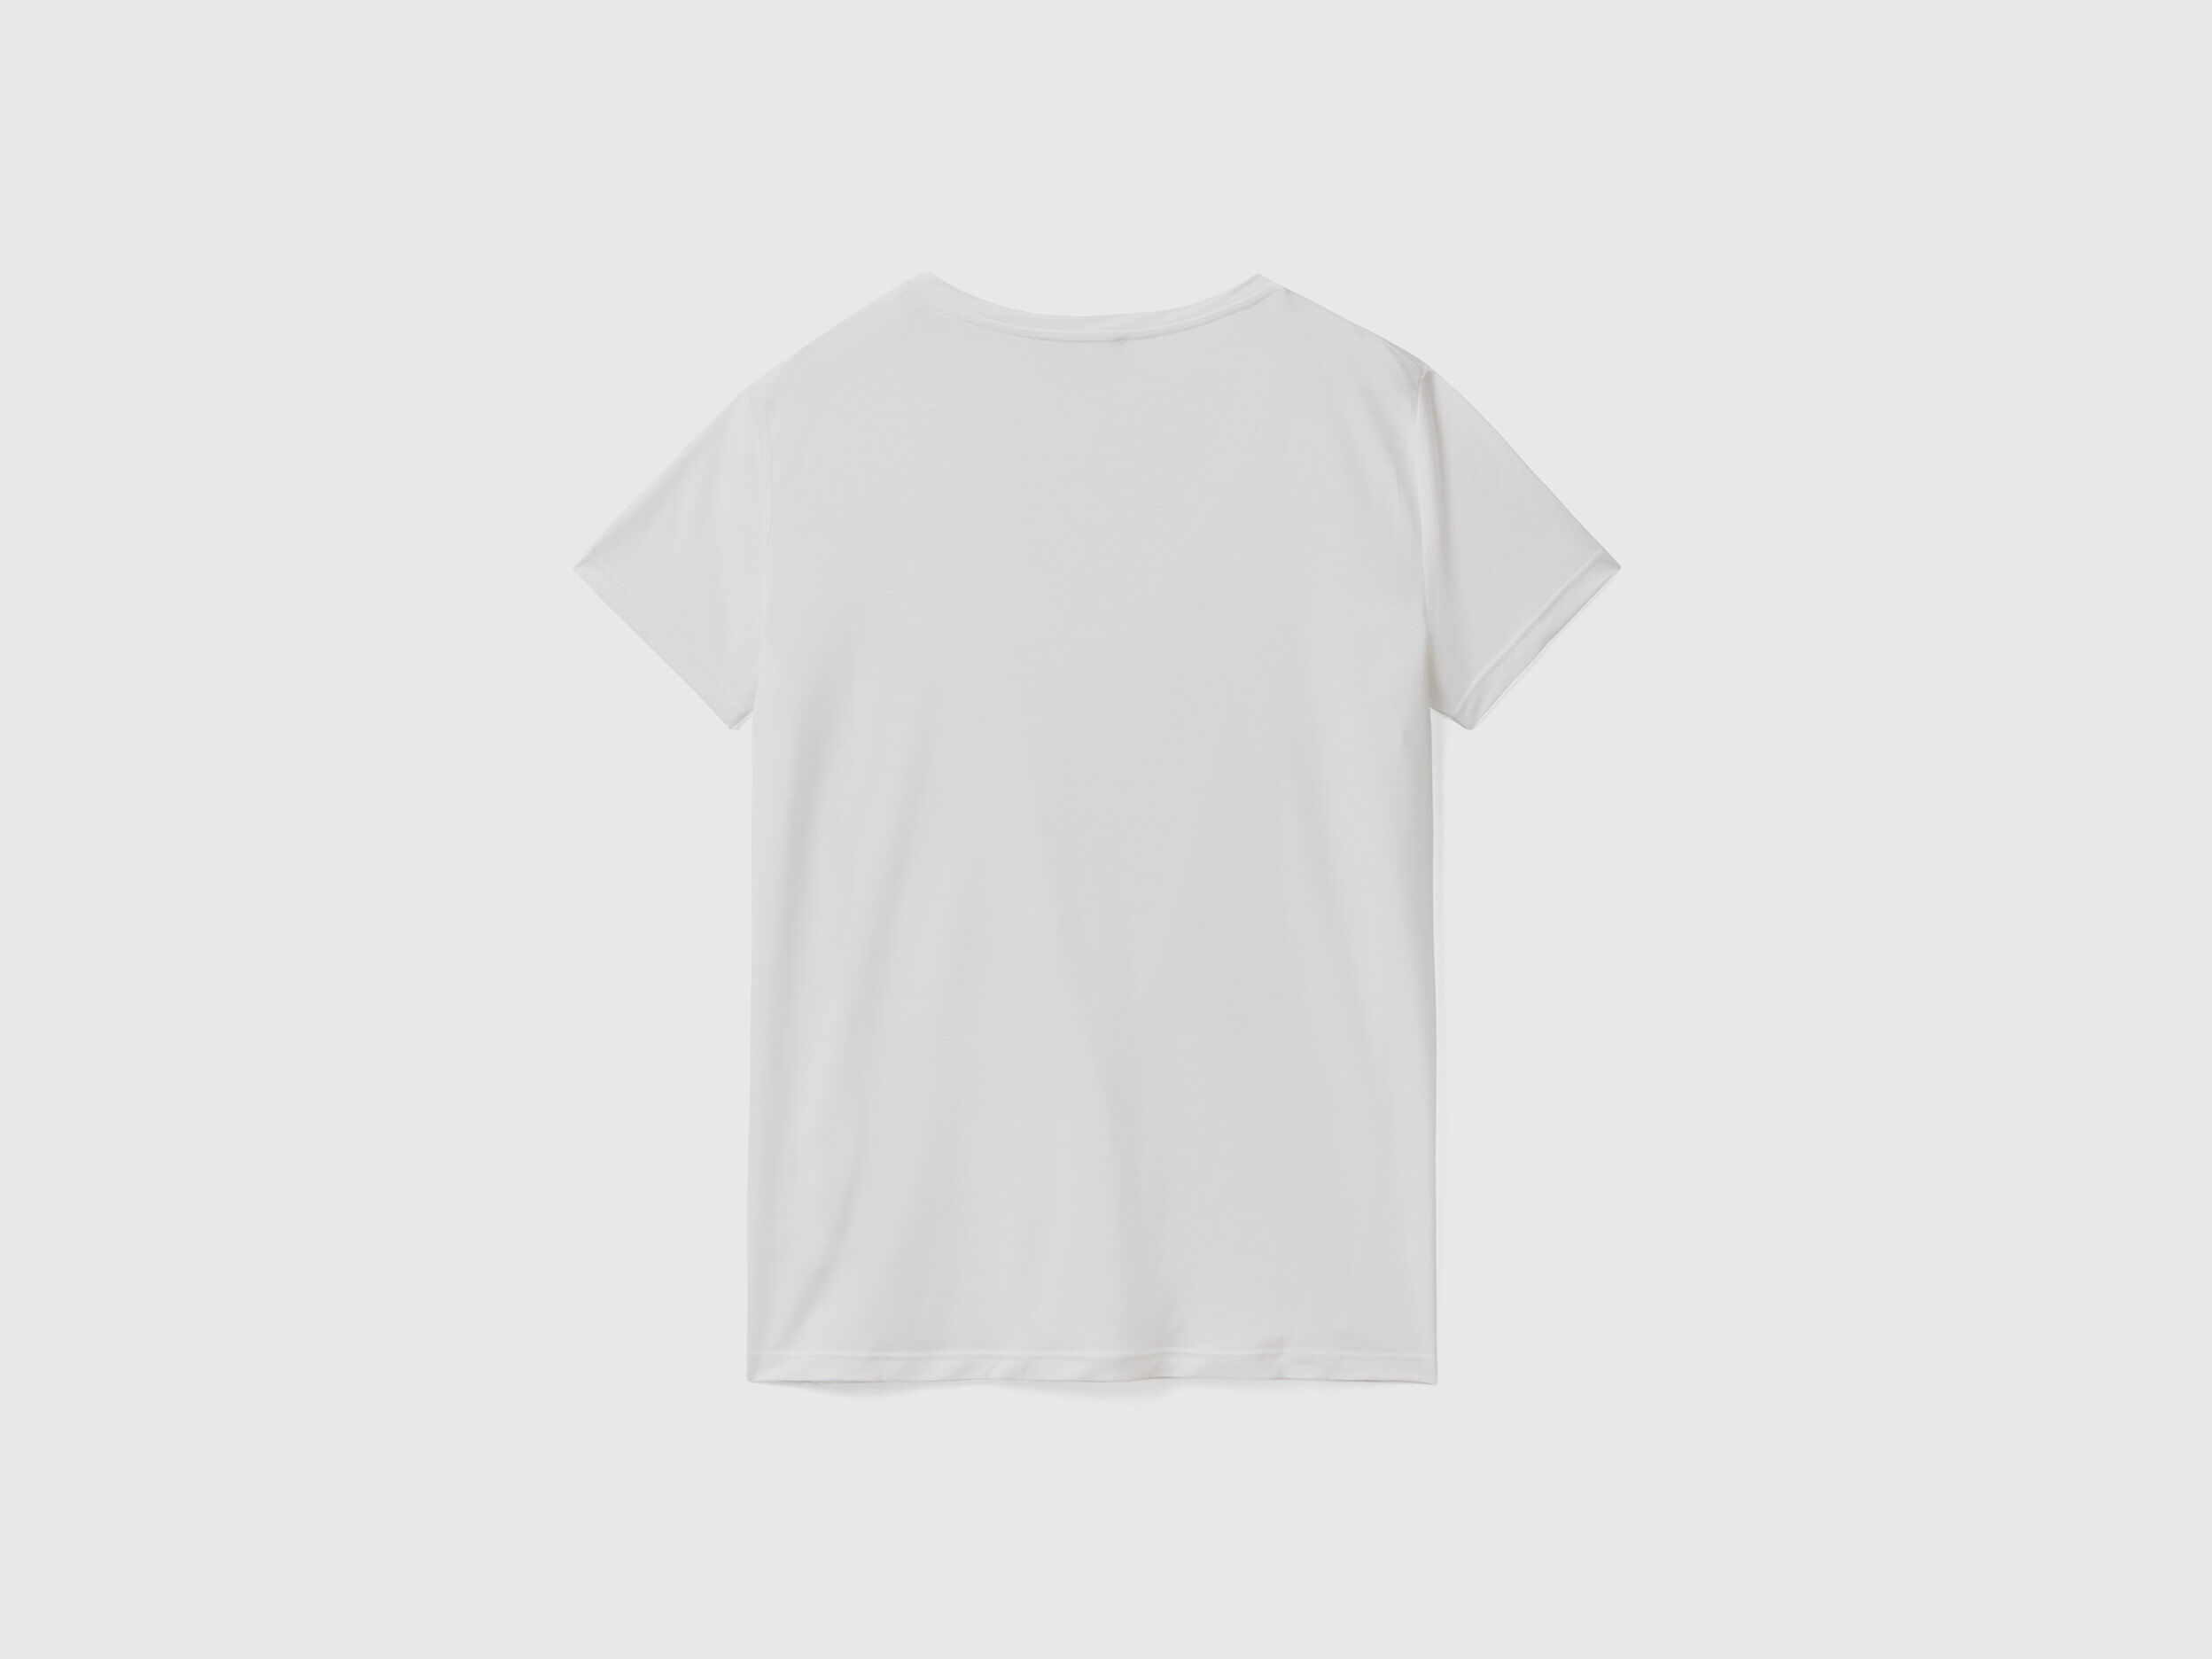 V-neck t-shirt in sustainable viscose